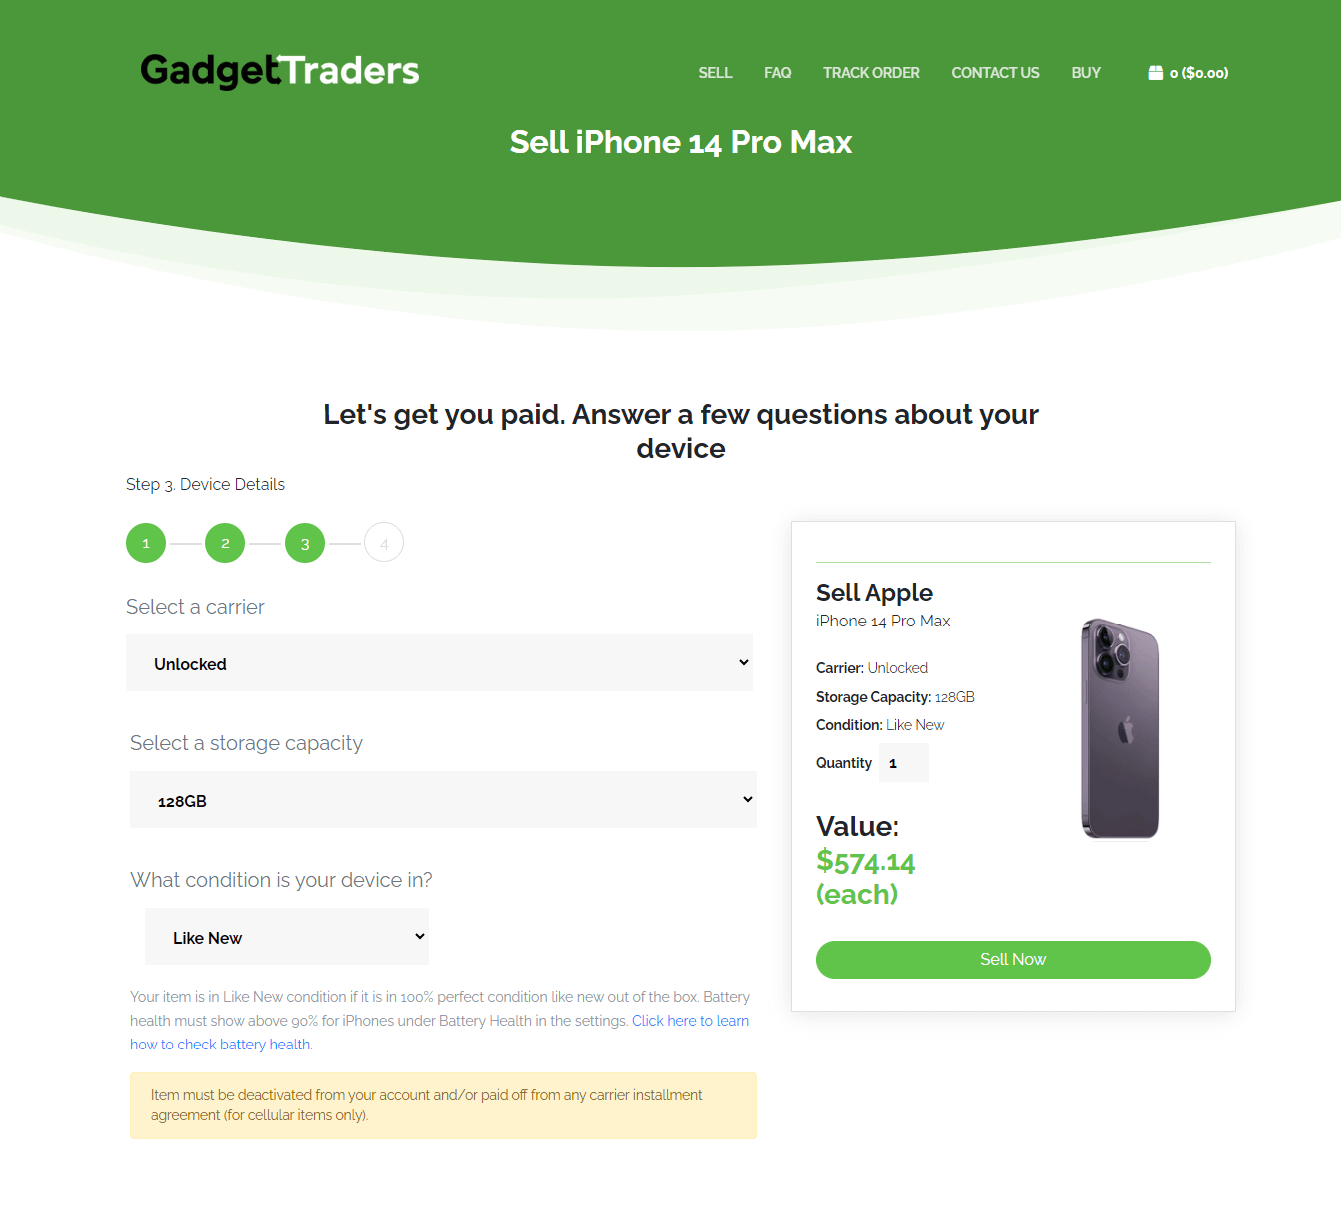 Gadget Traders Trade-in Process - Step 1